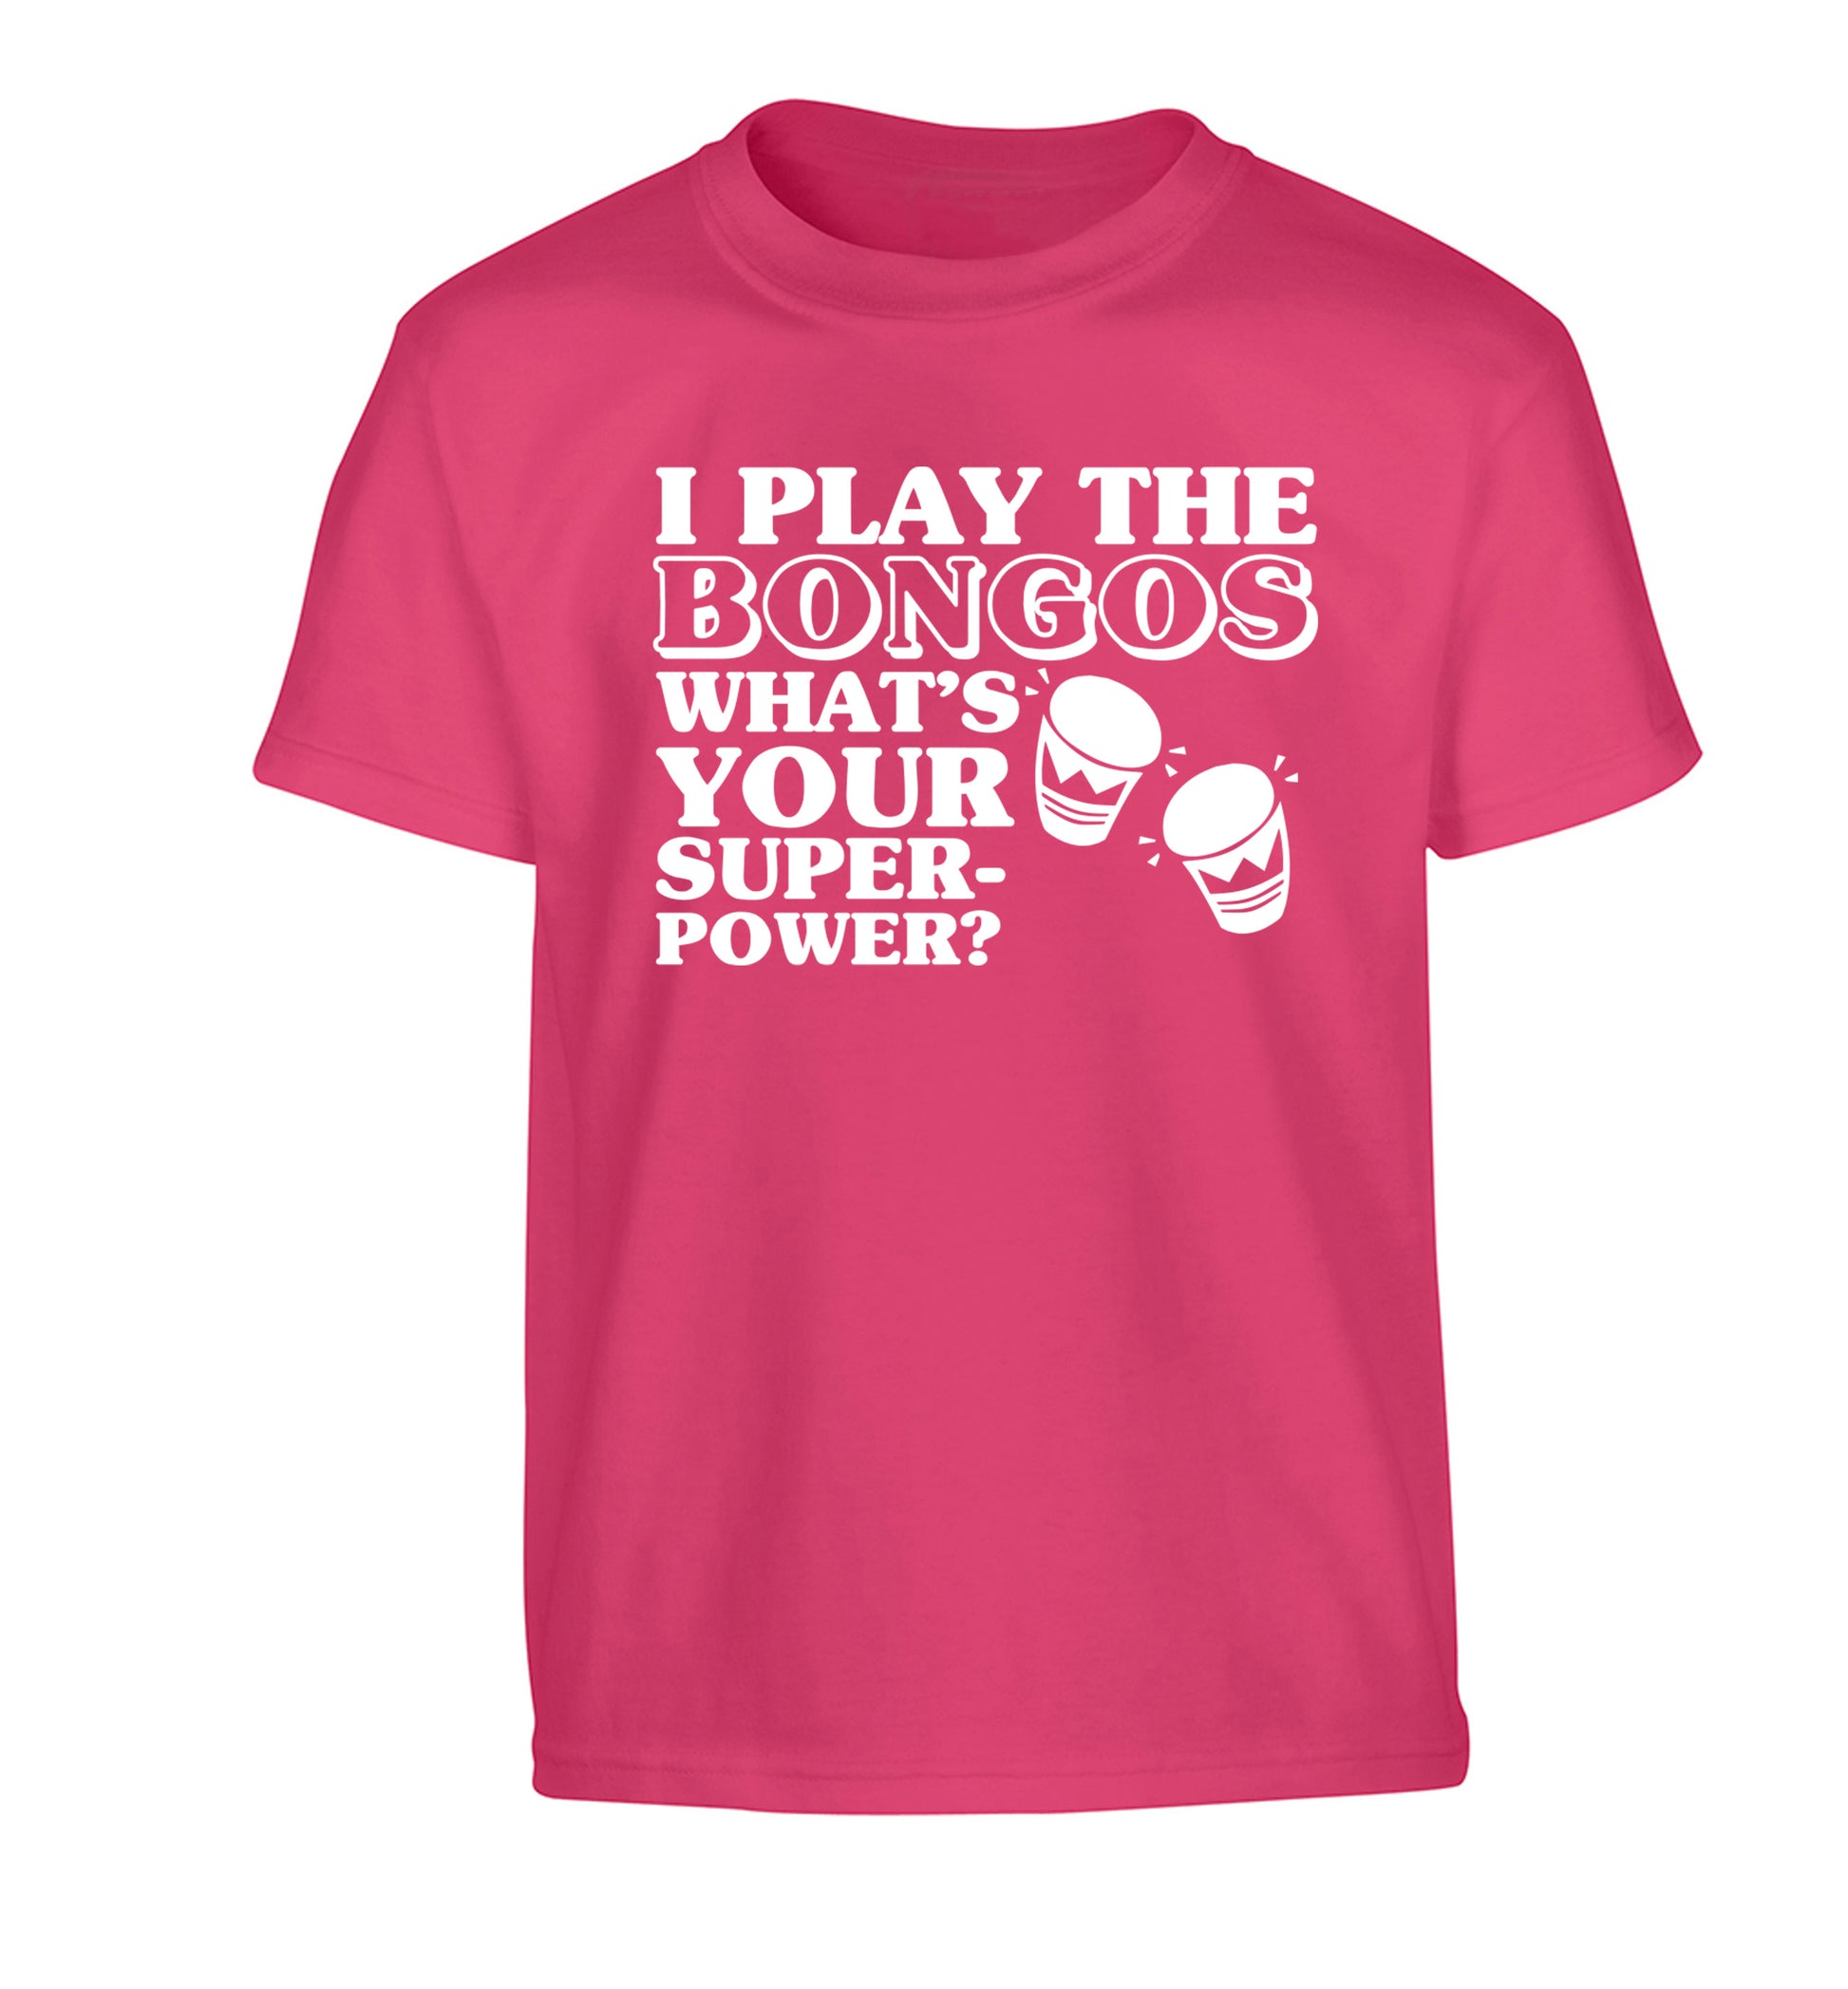 I play the bongos what's your superpower? Children's pink Tshirt 12-14 Years